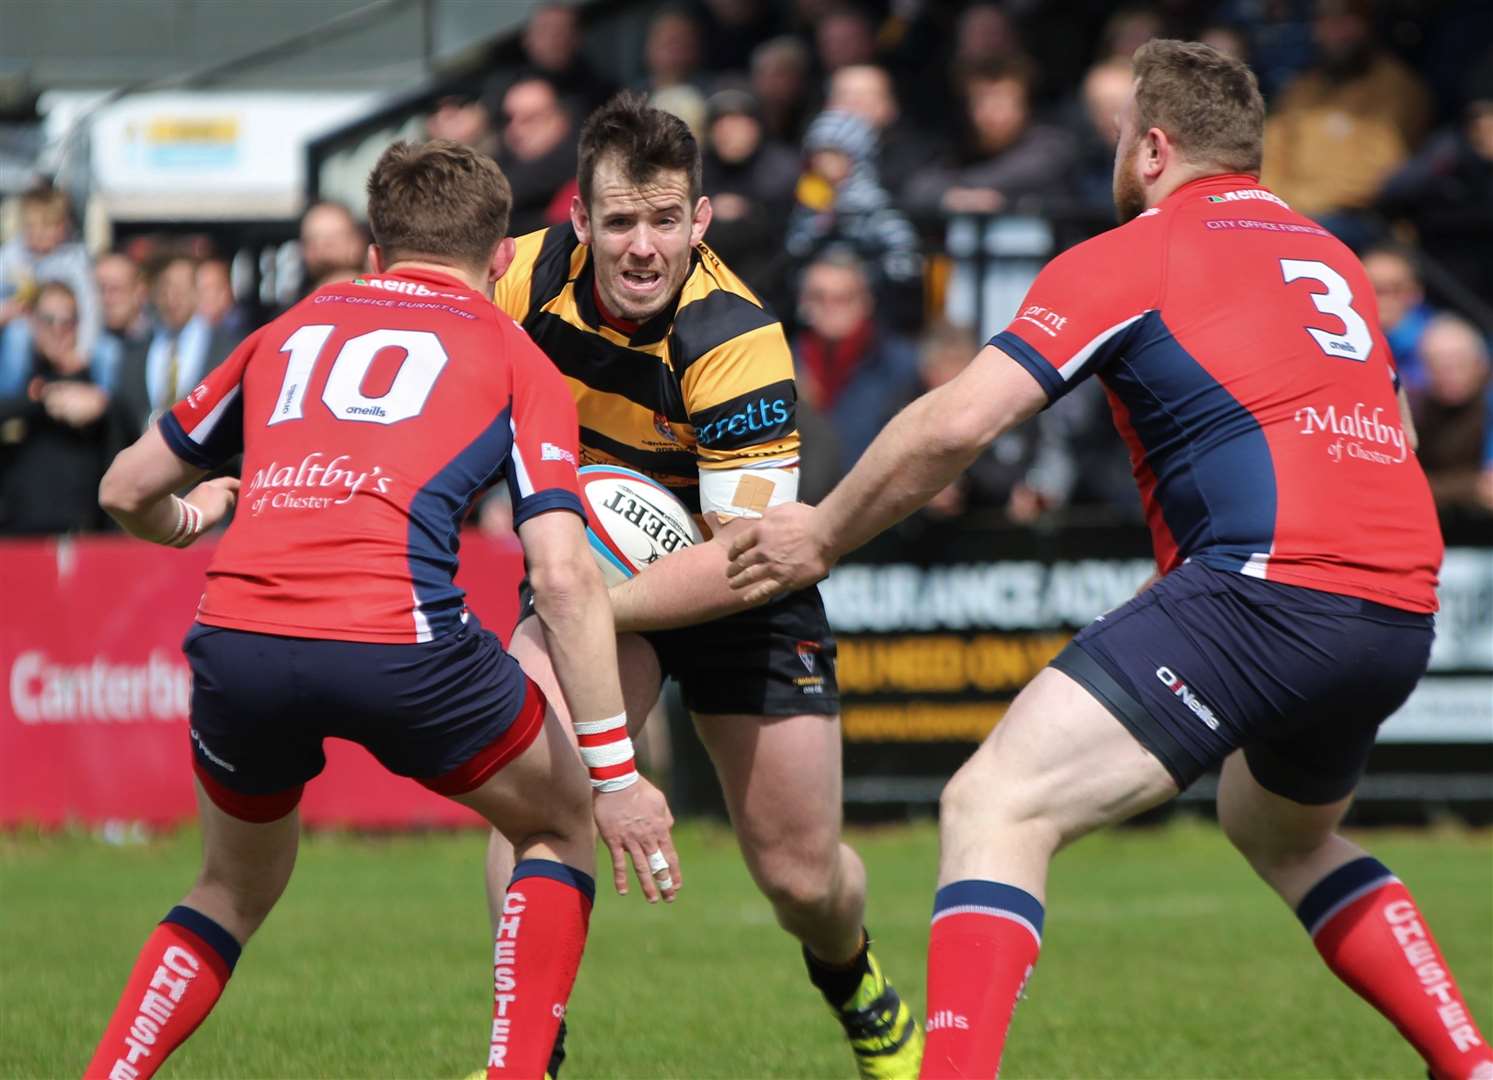 Canterbury skipper Sean Stapleton in action during the play-off win against Chester Picture: Phillipa Hilton